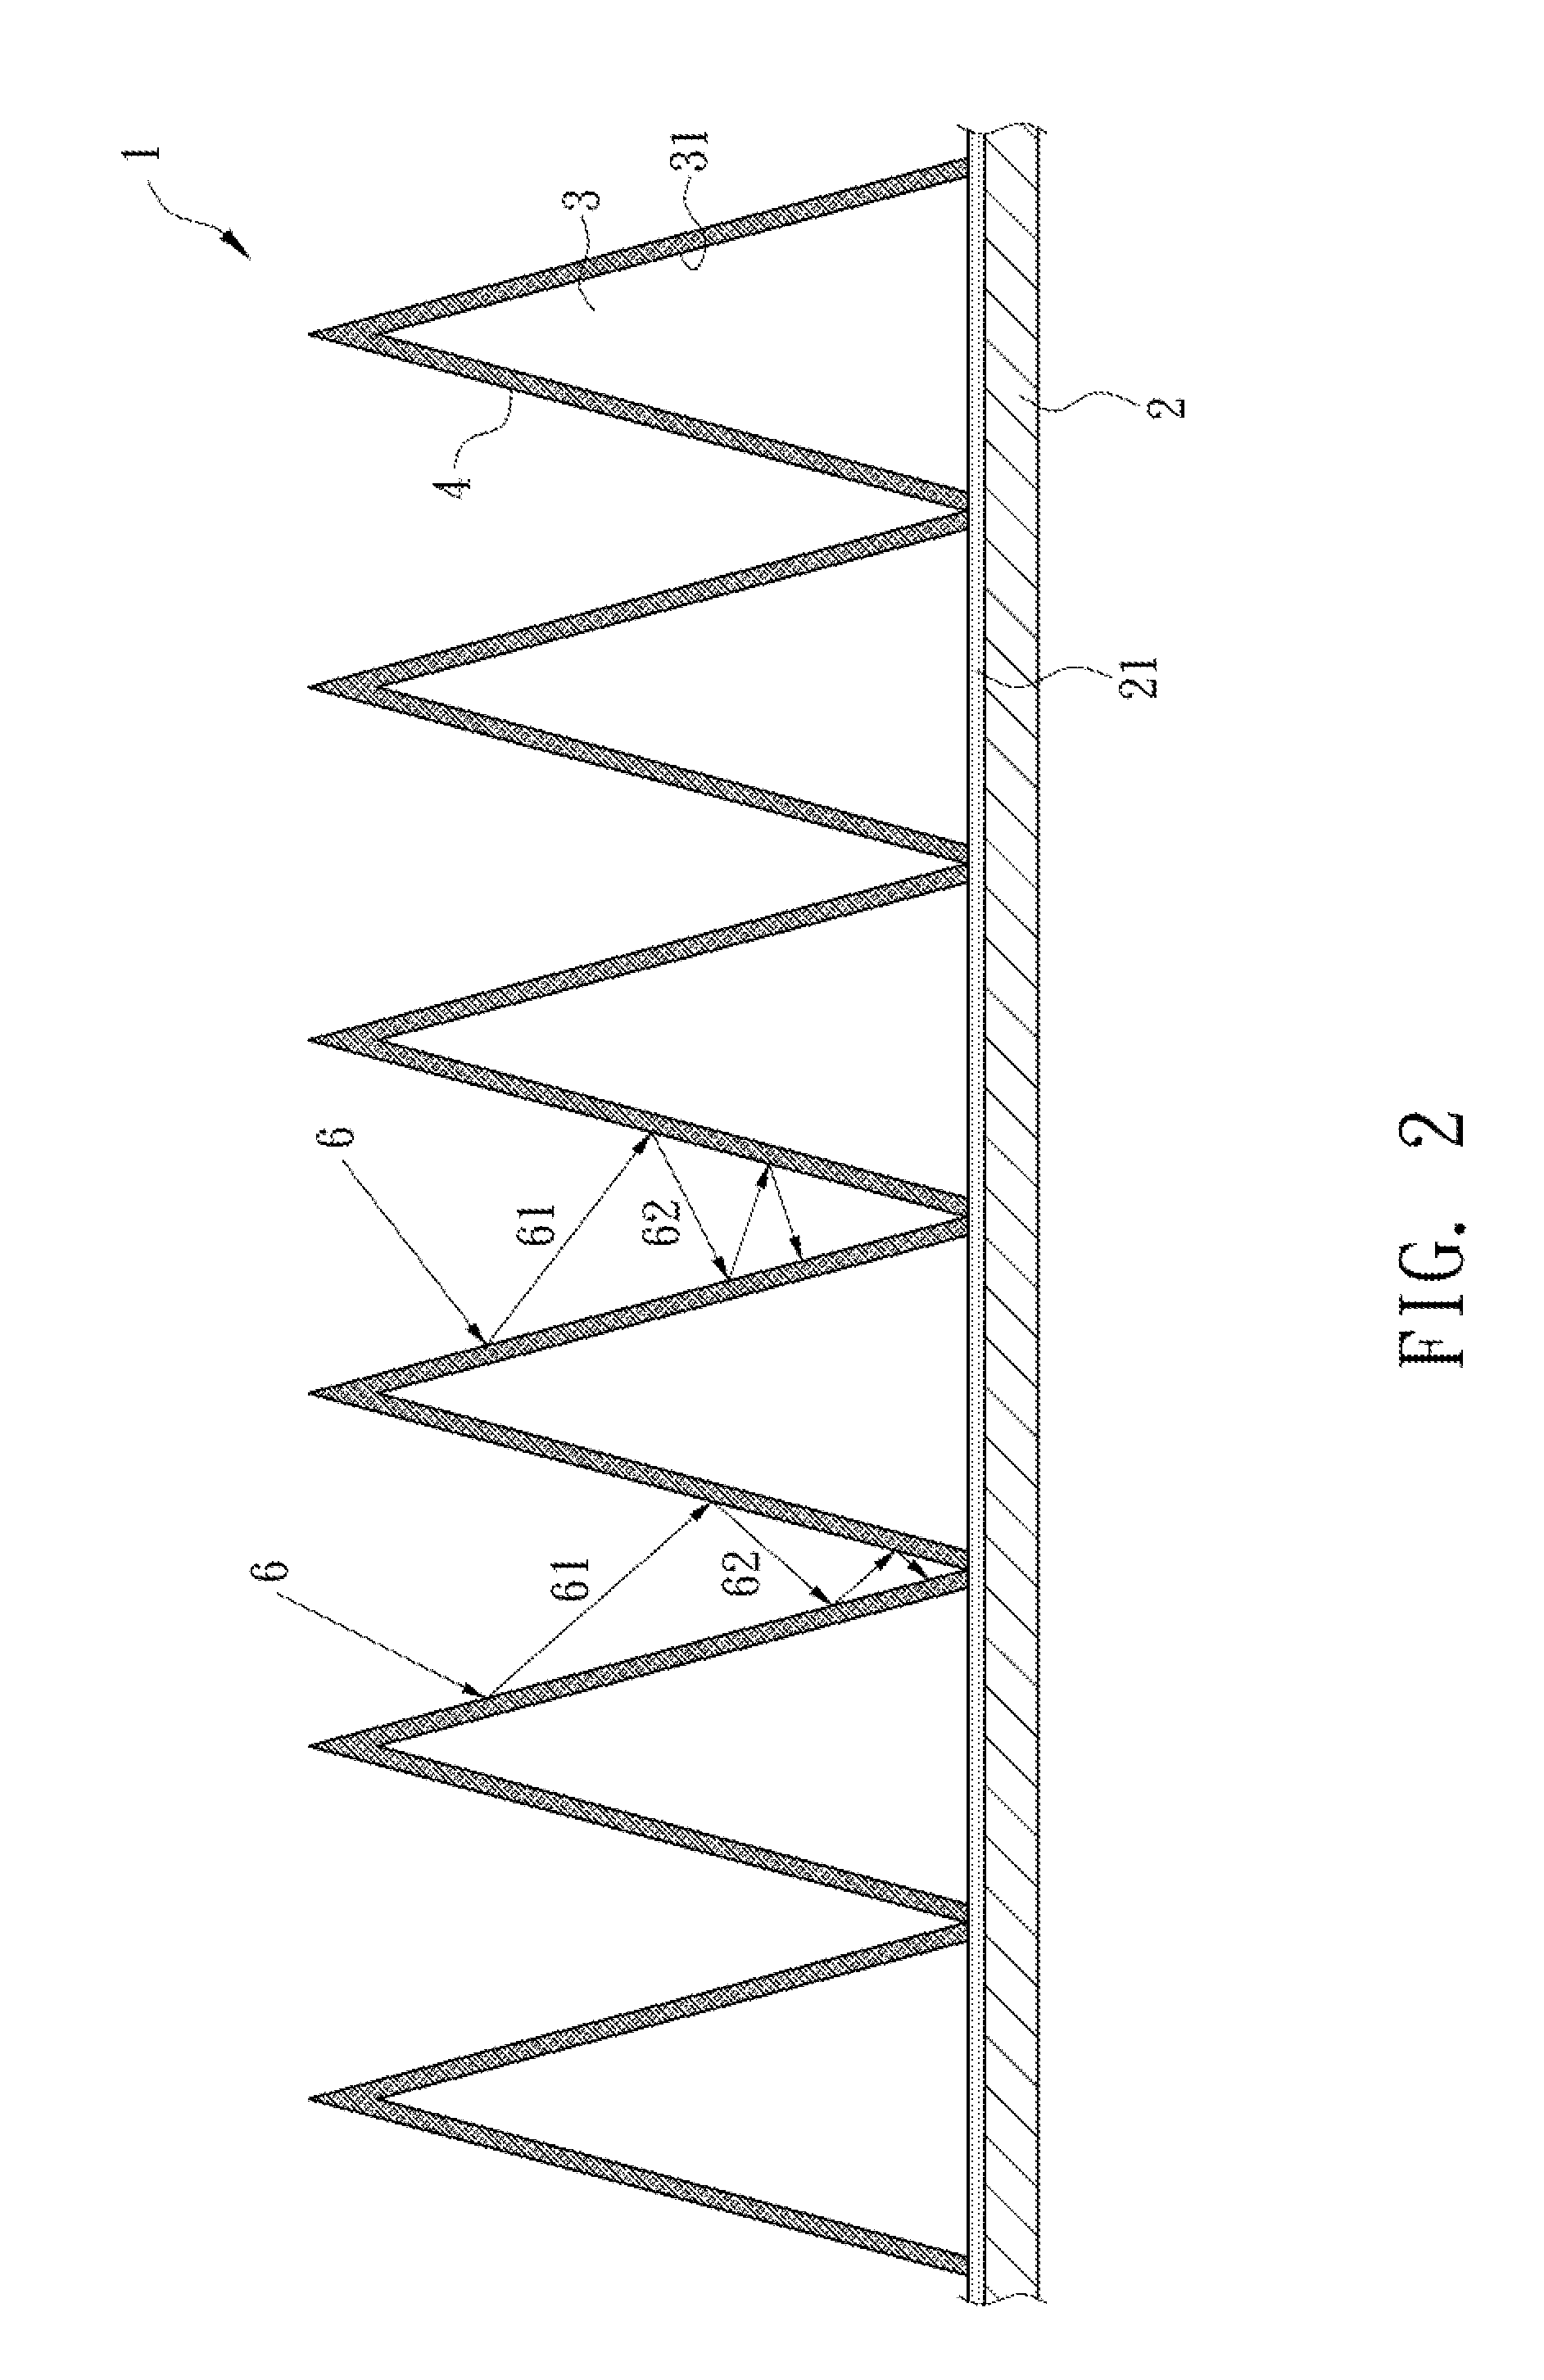 Solar power generation system with cone -shaped protrusions array